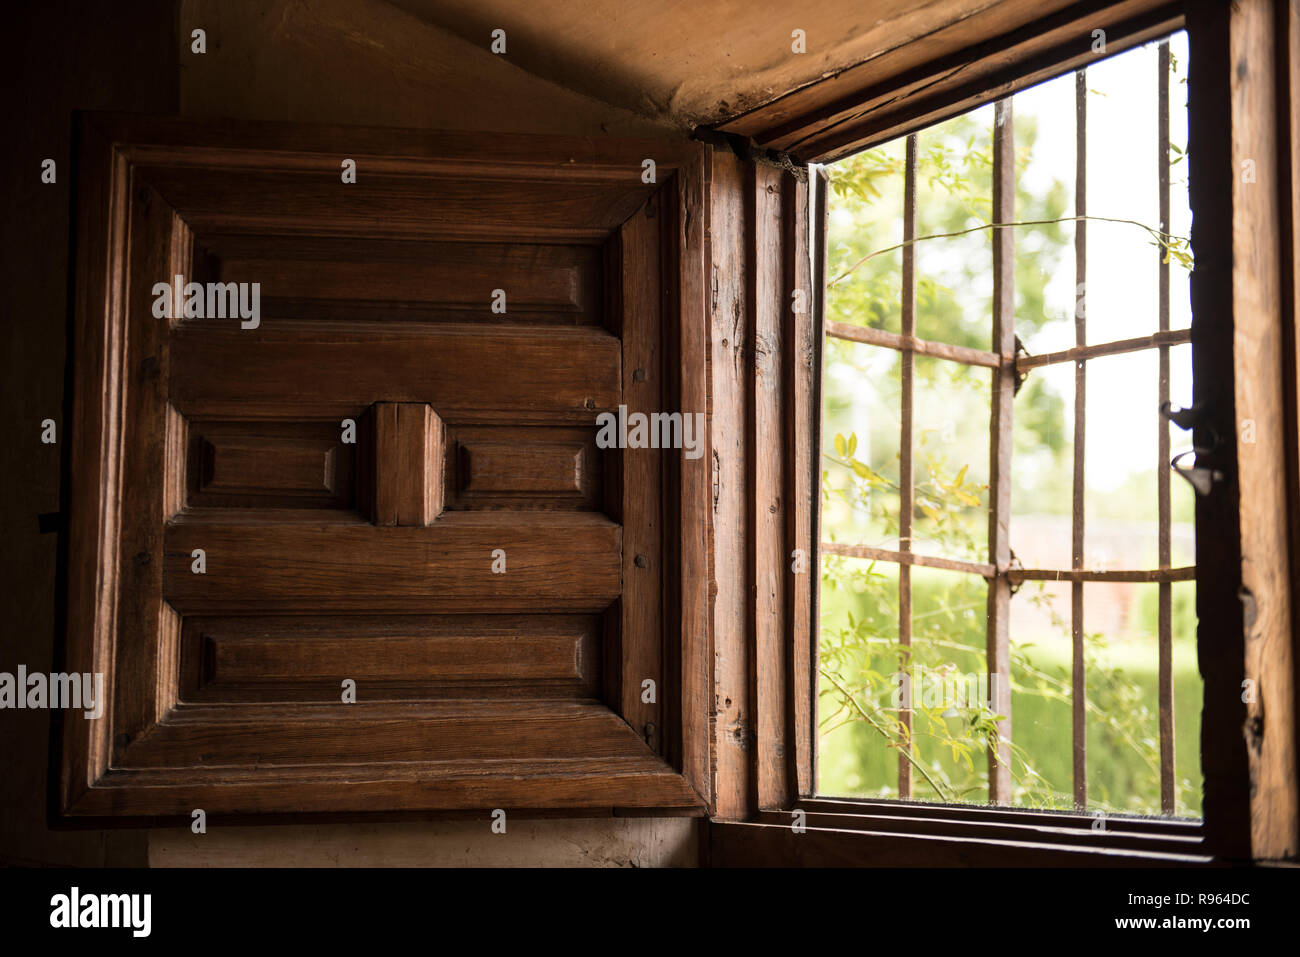 An wooden window closeup can be seen. The design looks modern day architecture, and iron bars can be seen attached to it. Lush green trees are seen ou Stock Photo